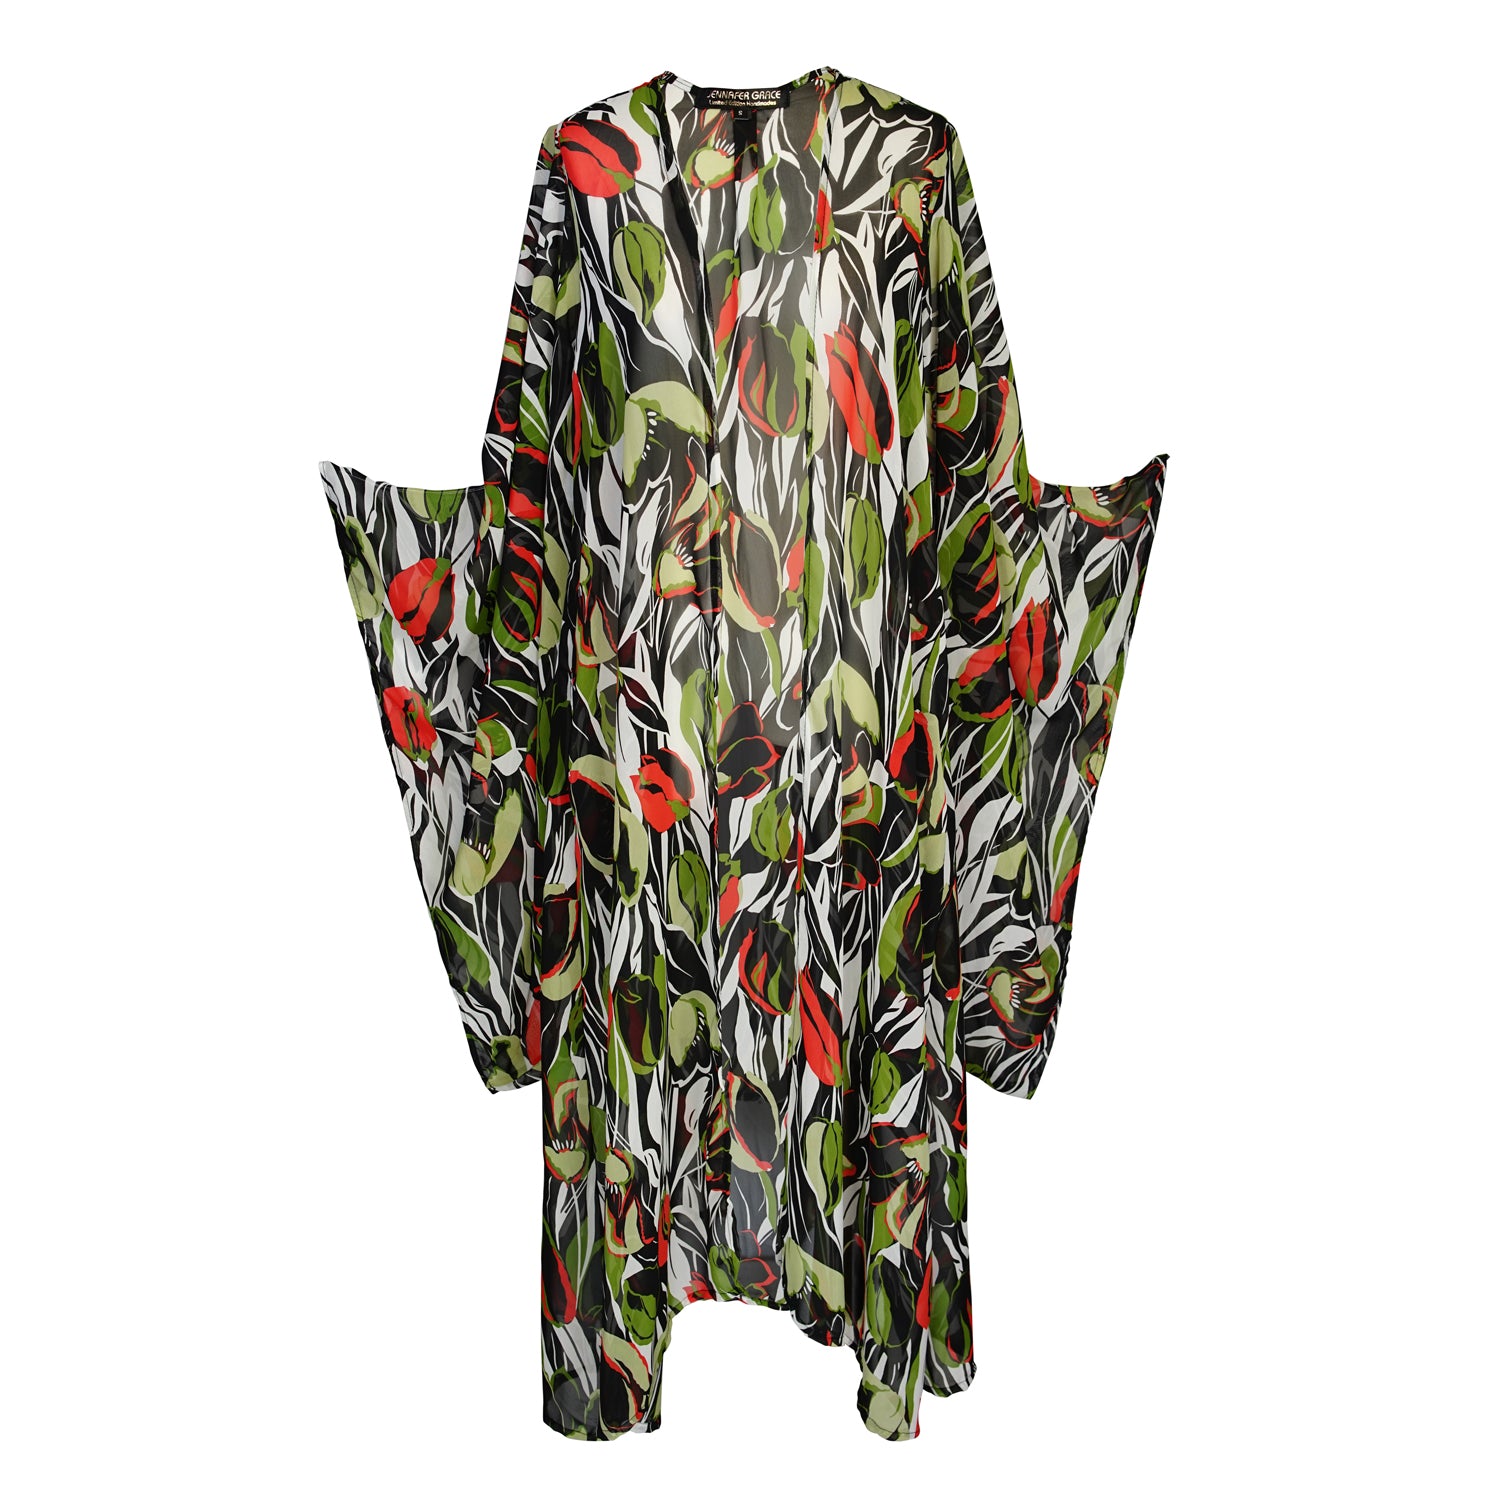 jennafer grace Exotica Safari kimono semi-sheer chiffon with red green tulip floral flower print on abstract black and white cover-up wrap dress with pockets duster jacket robe boho boho bohemian hippie whimsical romantic beach poolside resort cabana lounge wear unisex handmade in California USA